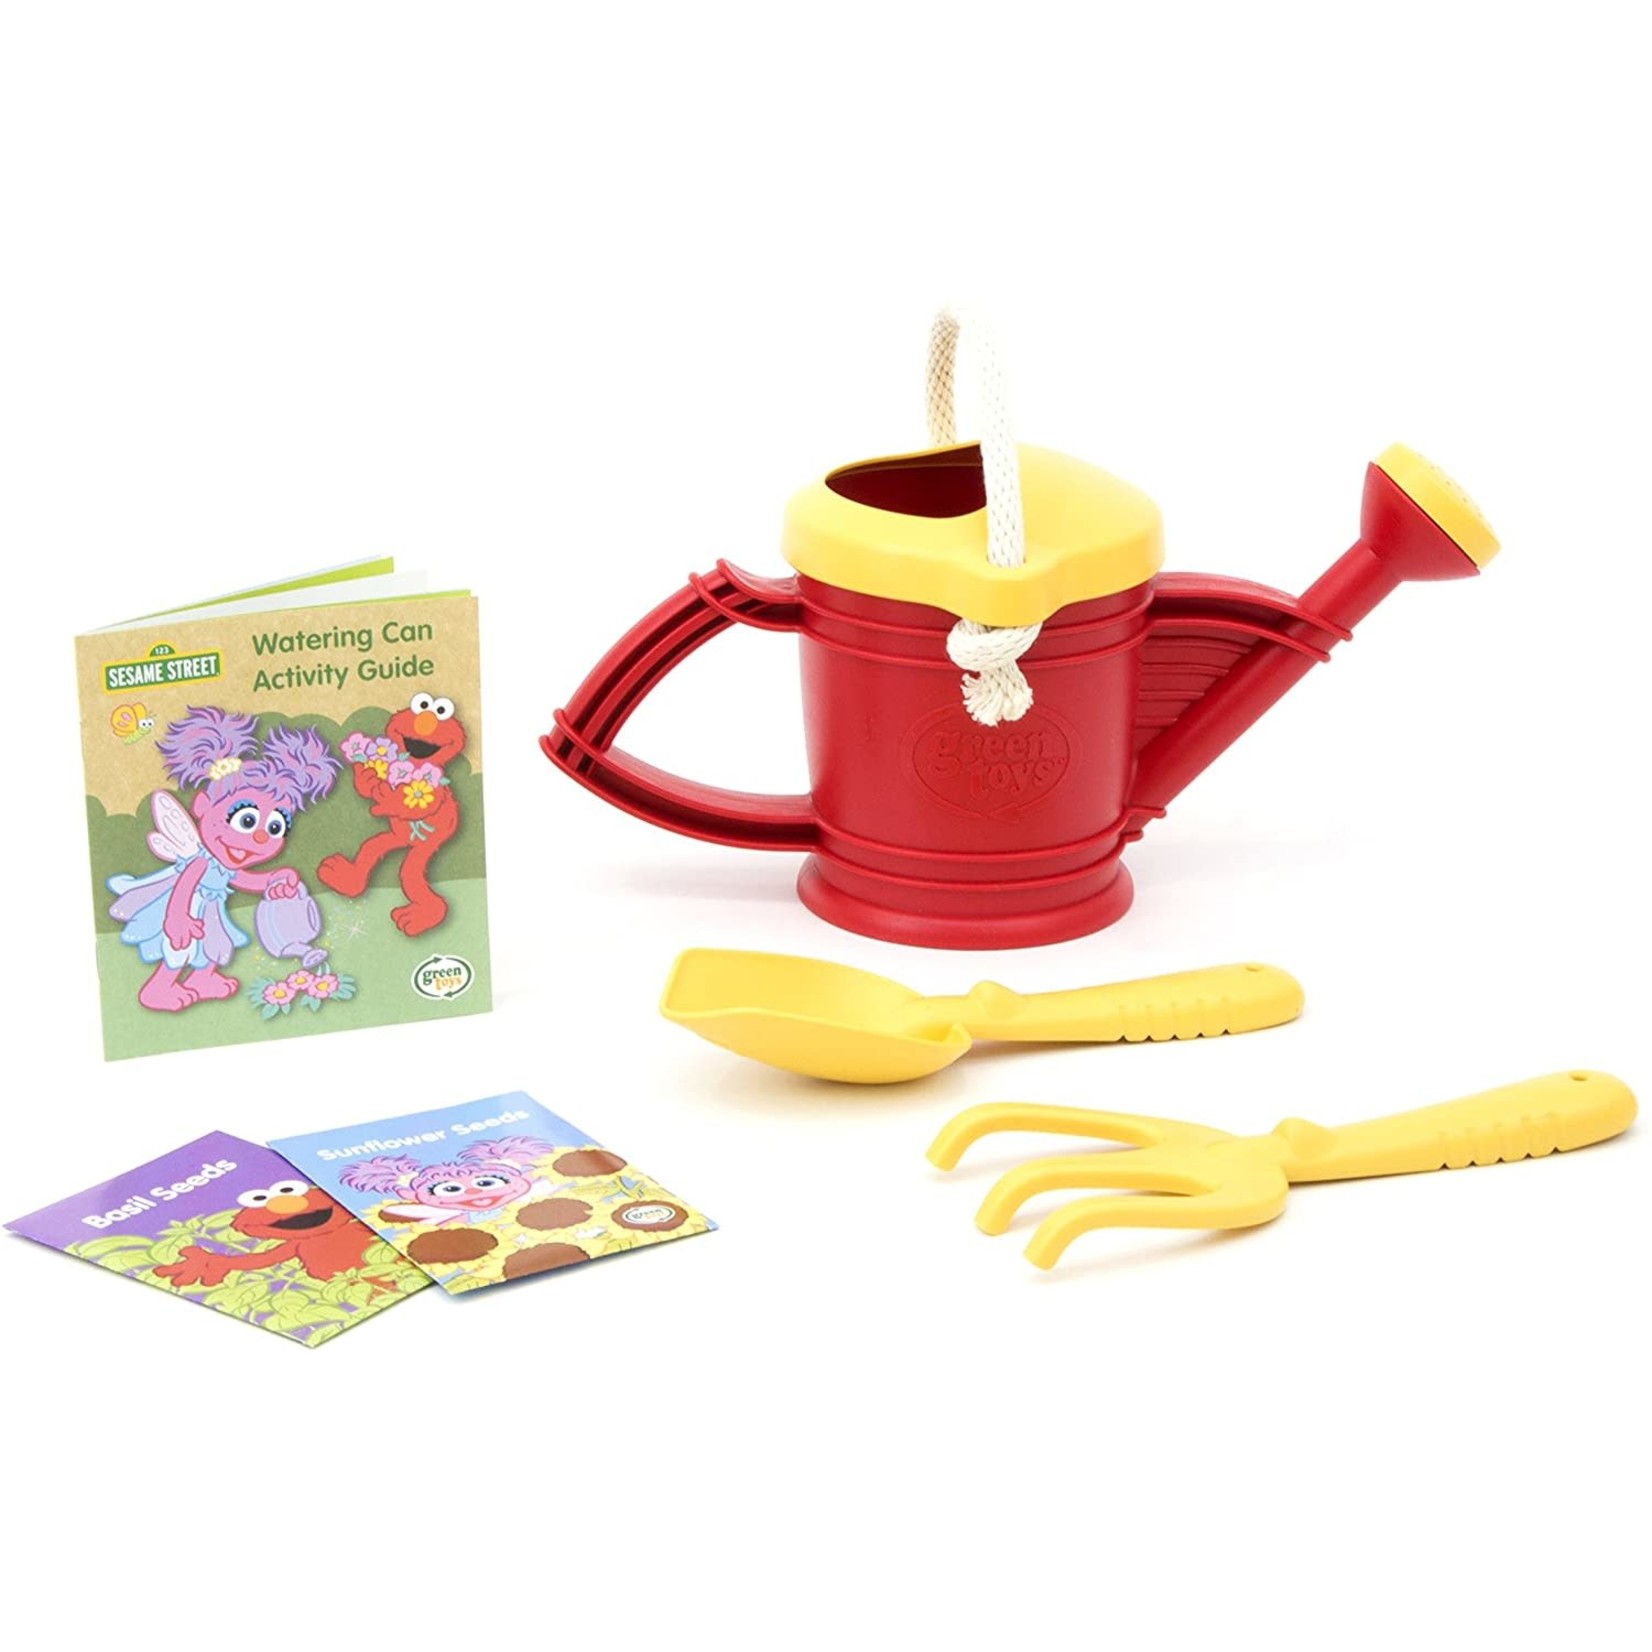 Elmo's Watering Can Outdoor Activity Kit 18m+